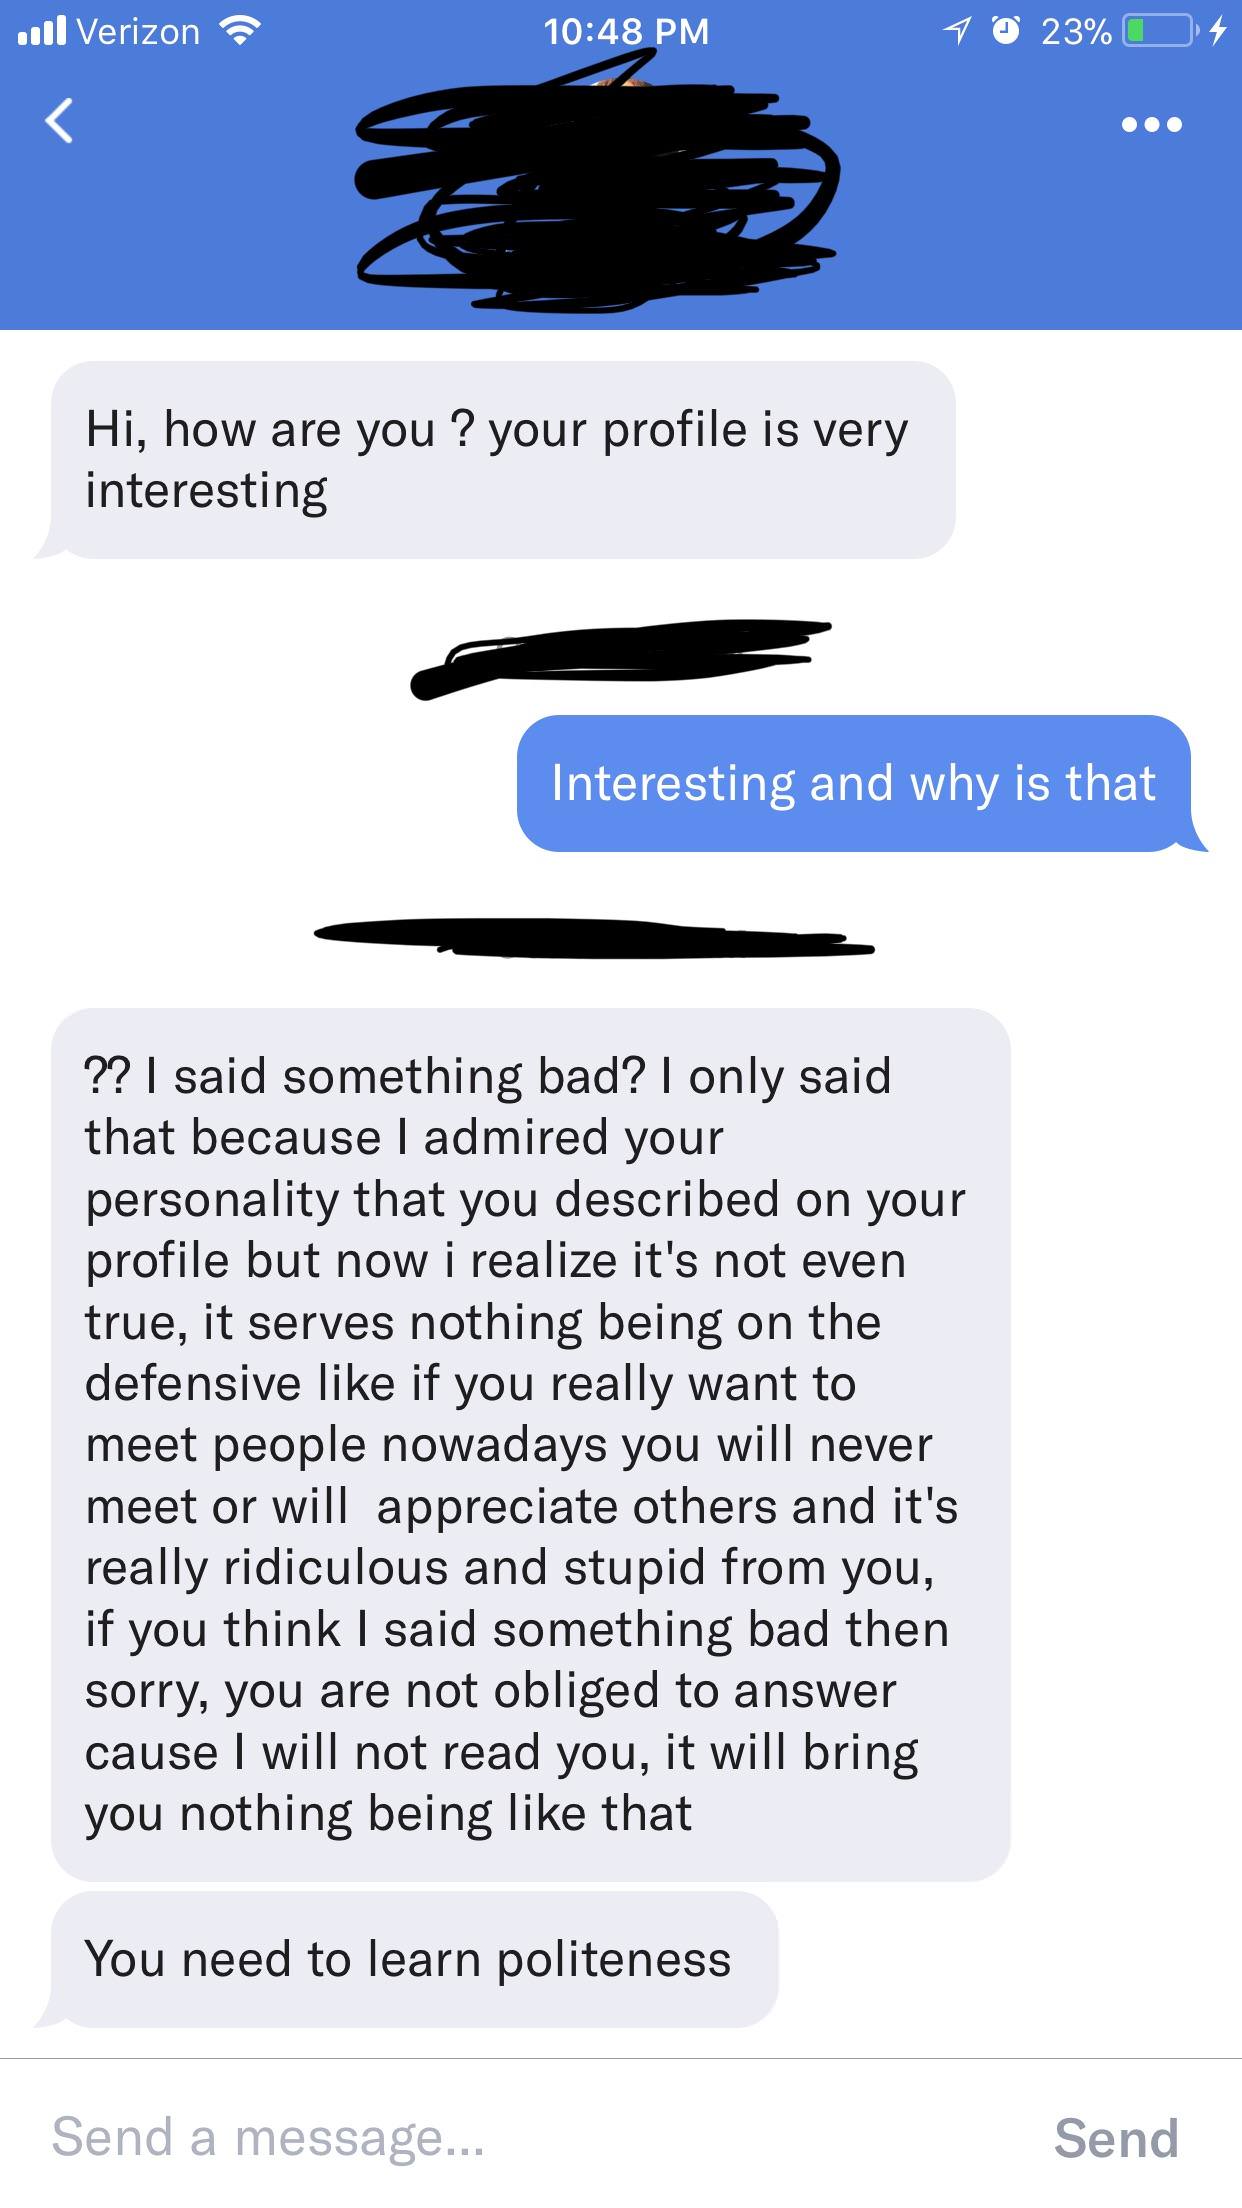 cringe dms - ull Verizon 10 23% 4 Hi, how are you? your profile is very interesting Interesting and why is that ?? I said something bad? I only said that because I admired your personality that you described on your profile but now i realize it's not even